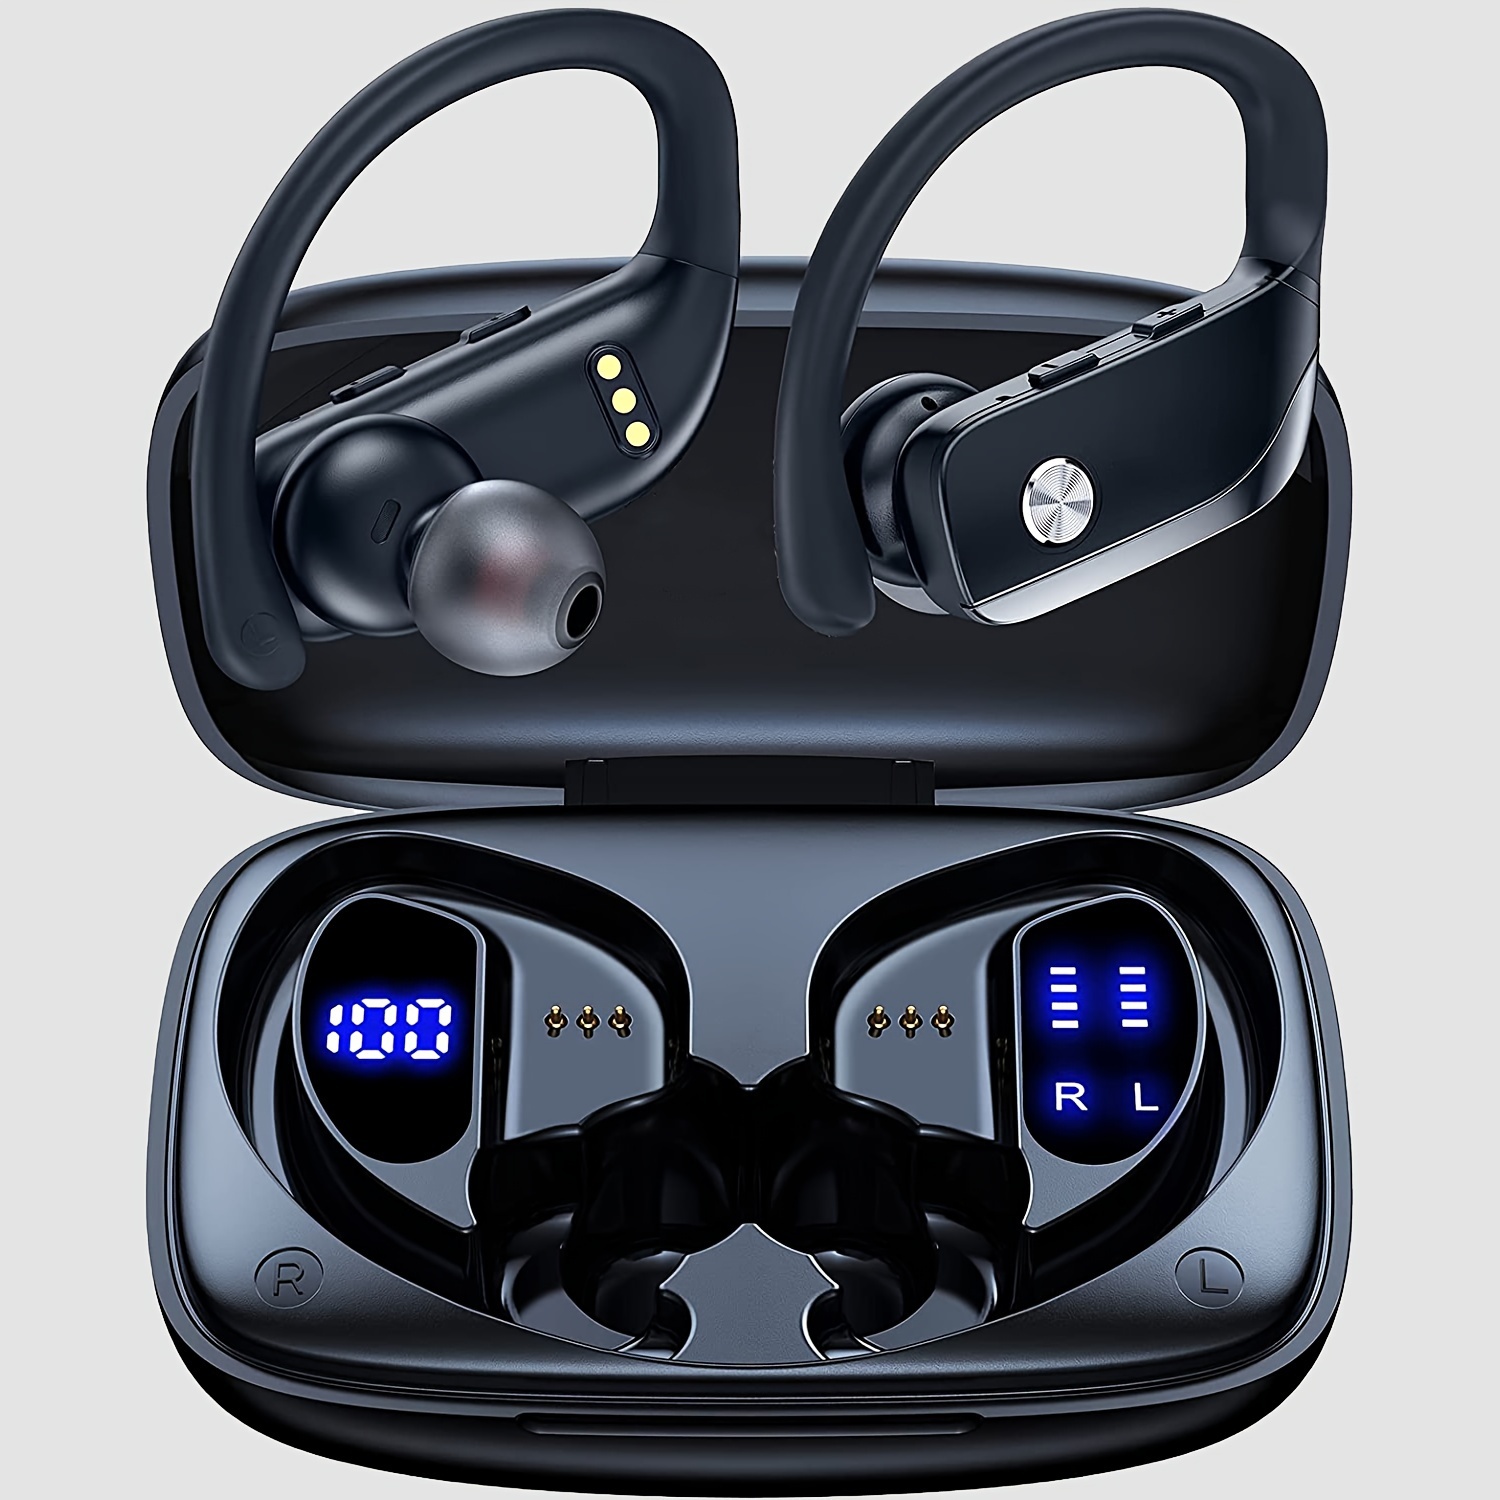 

Wireless Earbuds, Stereo Surround Headphones, Long Standy Play Back Sport Earphones With Led Display, Over-ear Buds With Earhooks Built-in Mic, Noise Cancelling Headset For Workout